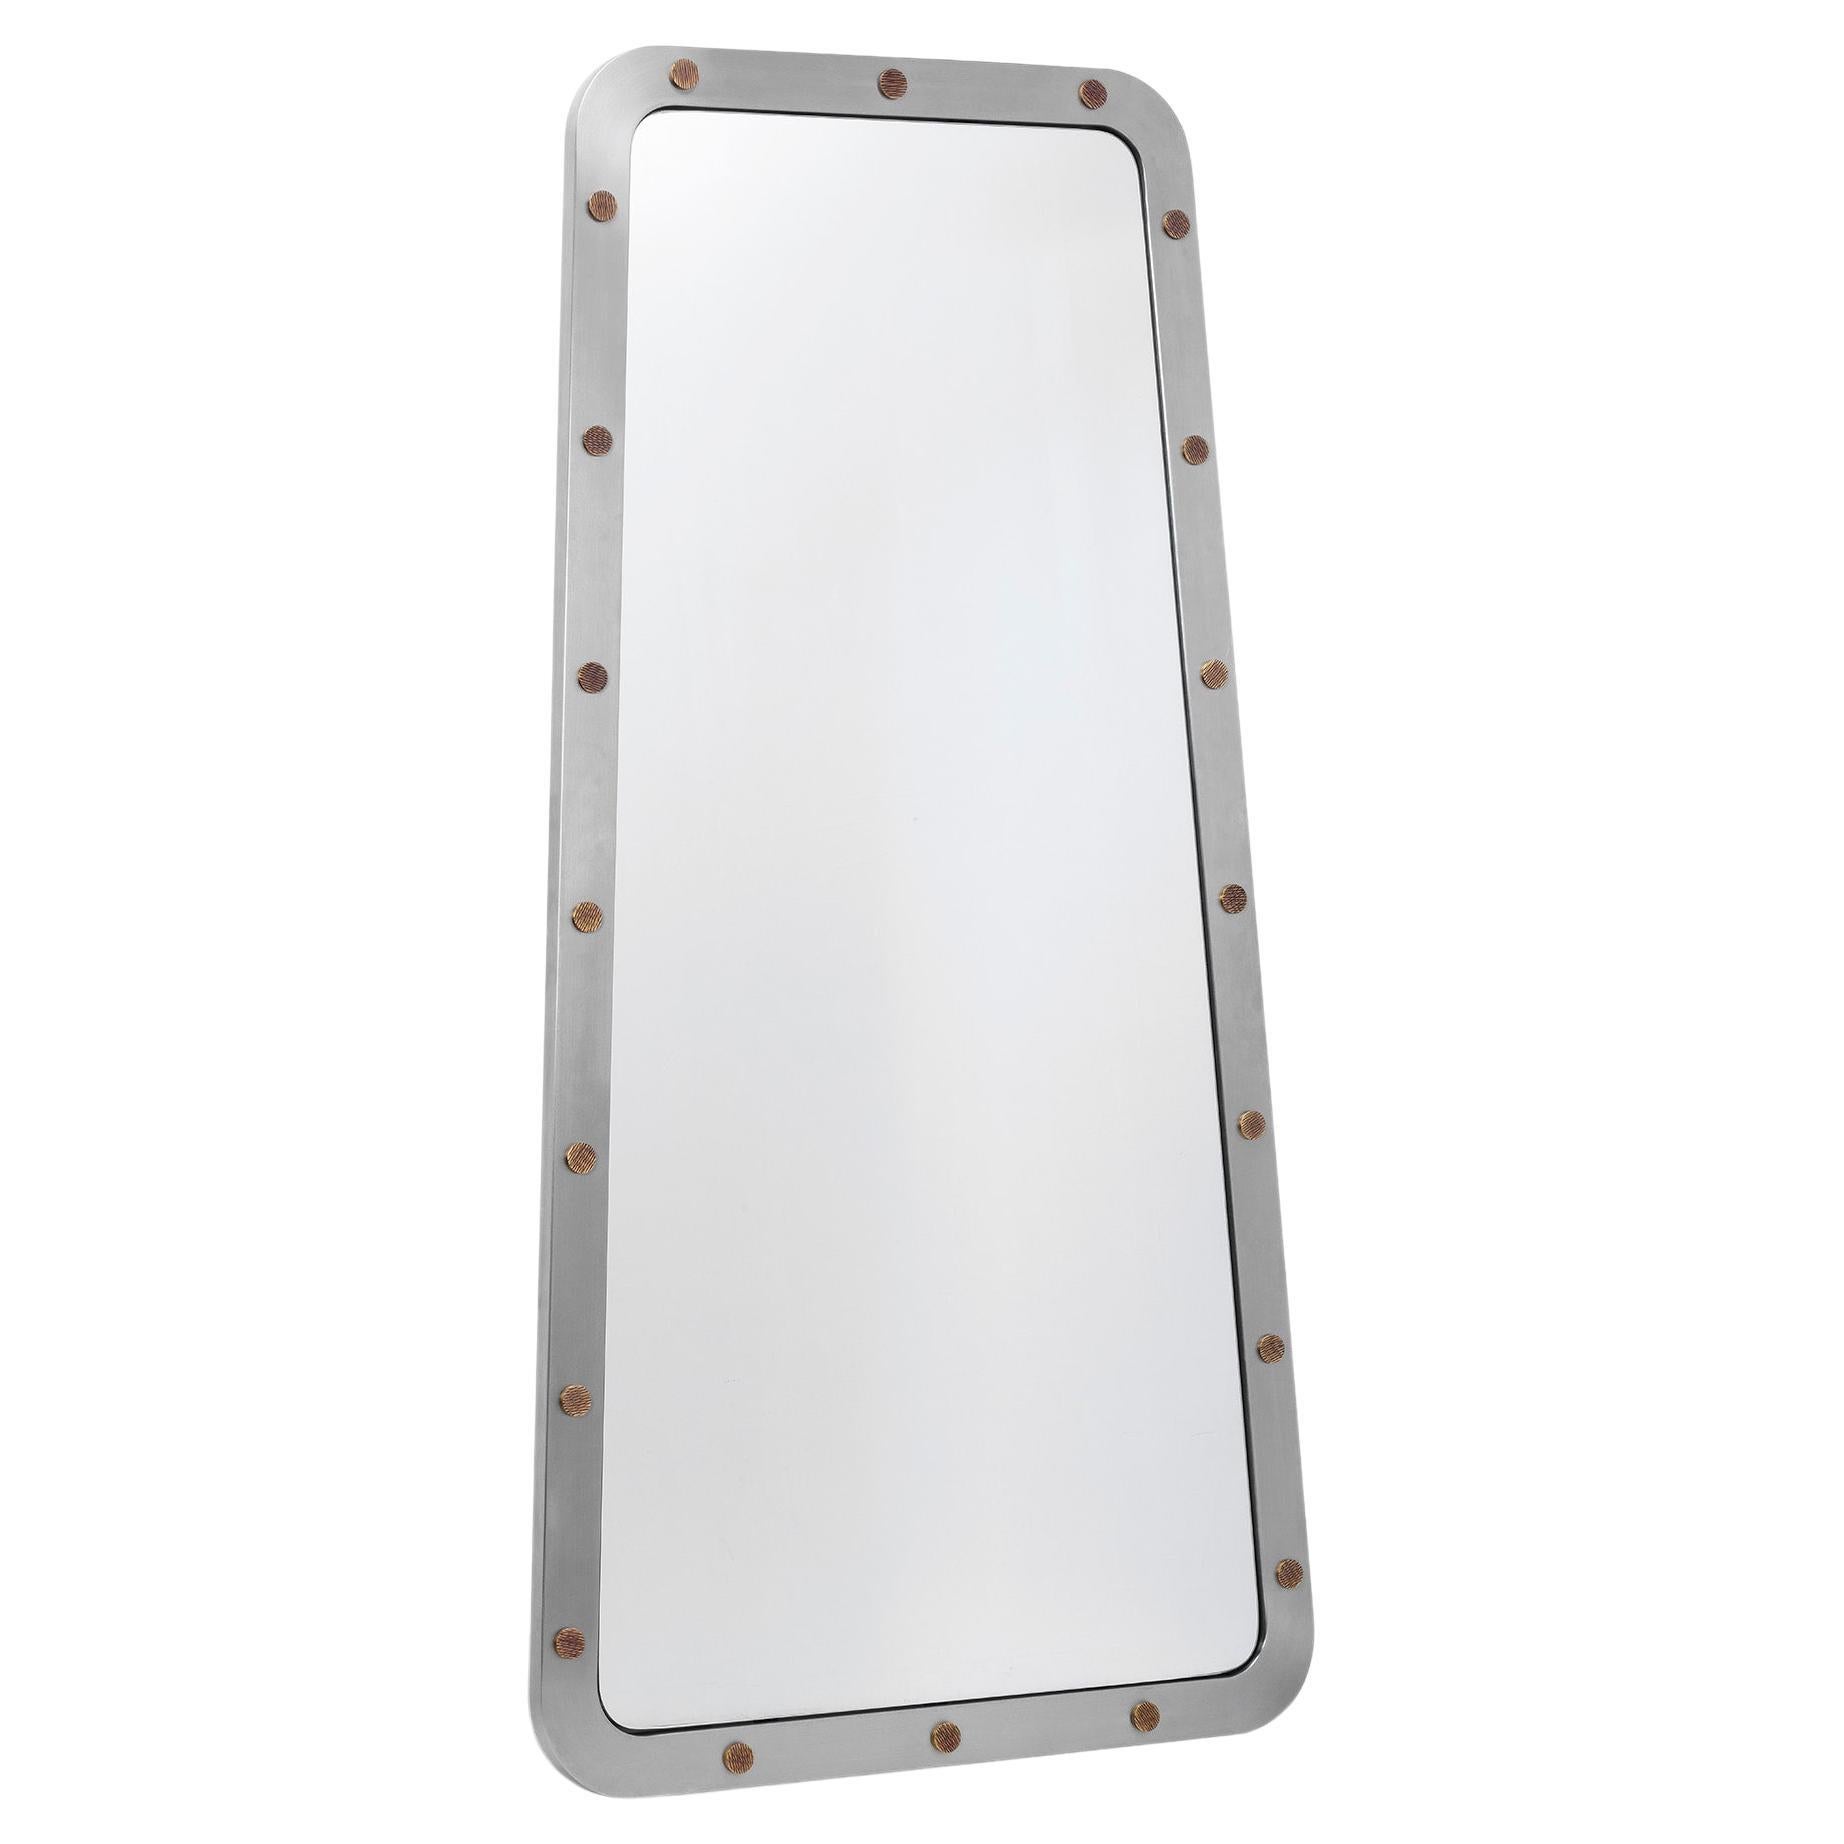 Cluster Mirror, in Brushed Stainless Steel, Handcrafted in Portugal by Duistt